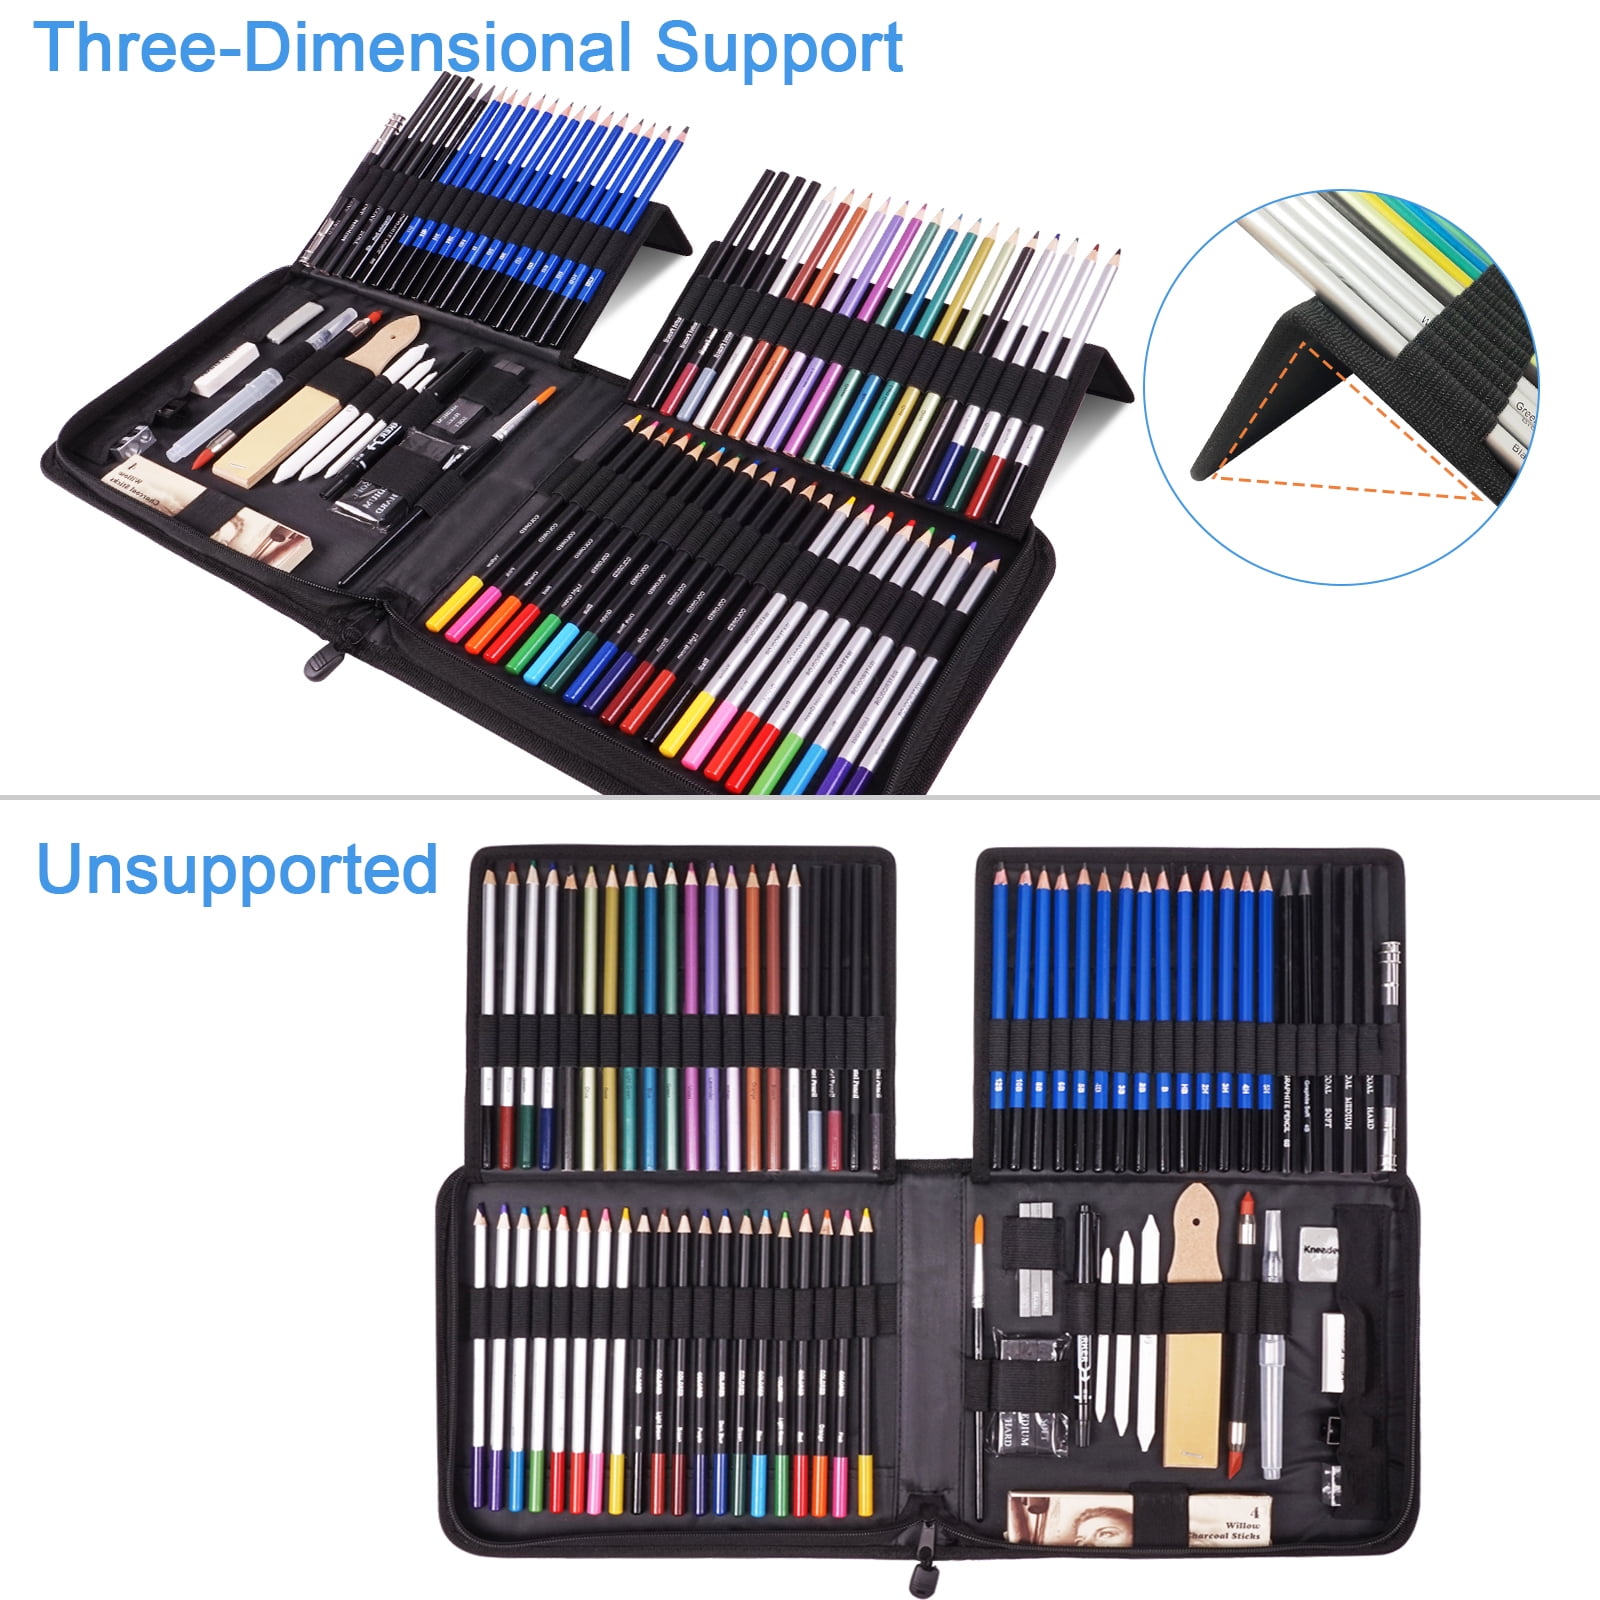 Glokers 72Piece Arts Supplies and Drawing Kit Set  Complete Set of Art  Pencils Graphite Colored Metallic Charcoal Watercolor  Also Includes  9x12 Sketch Book Stumps Sharpener Eraser  More  Walmartcom